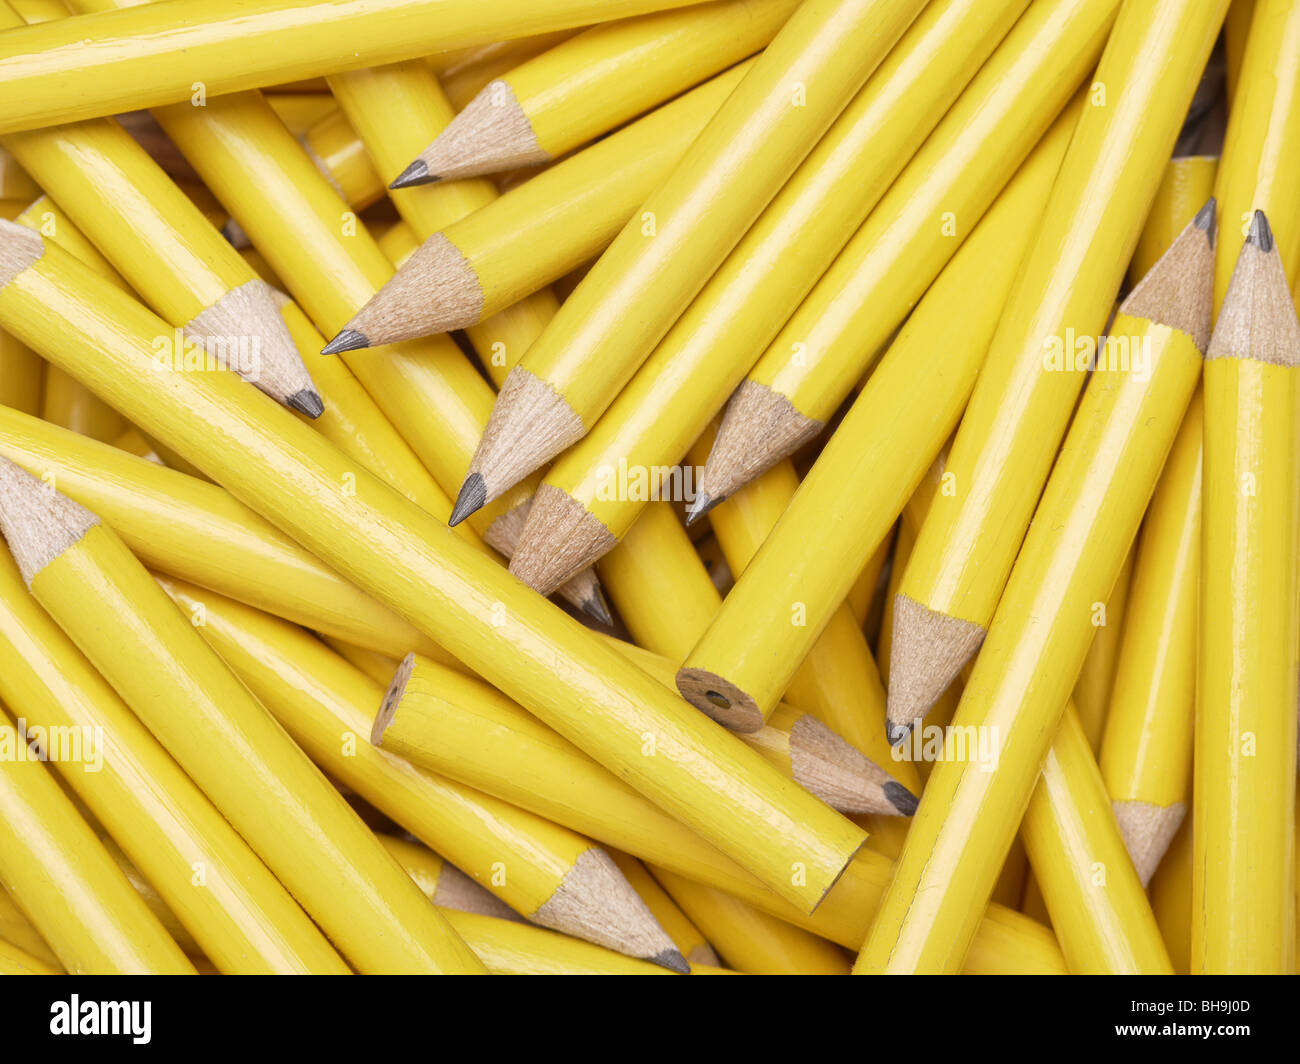 Bunch of yellow wooden pencils shot from above Stock Photo